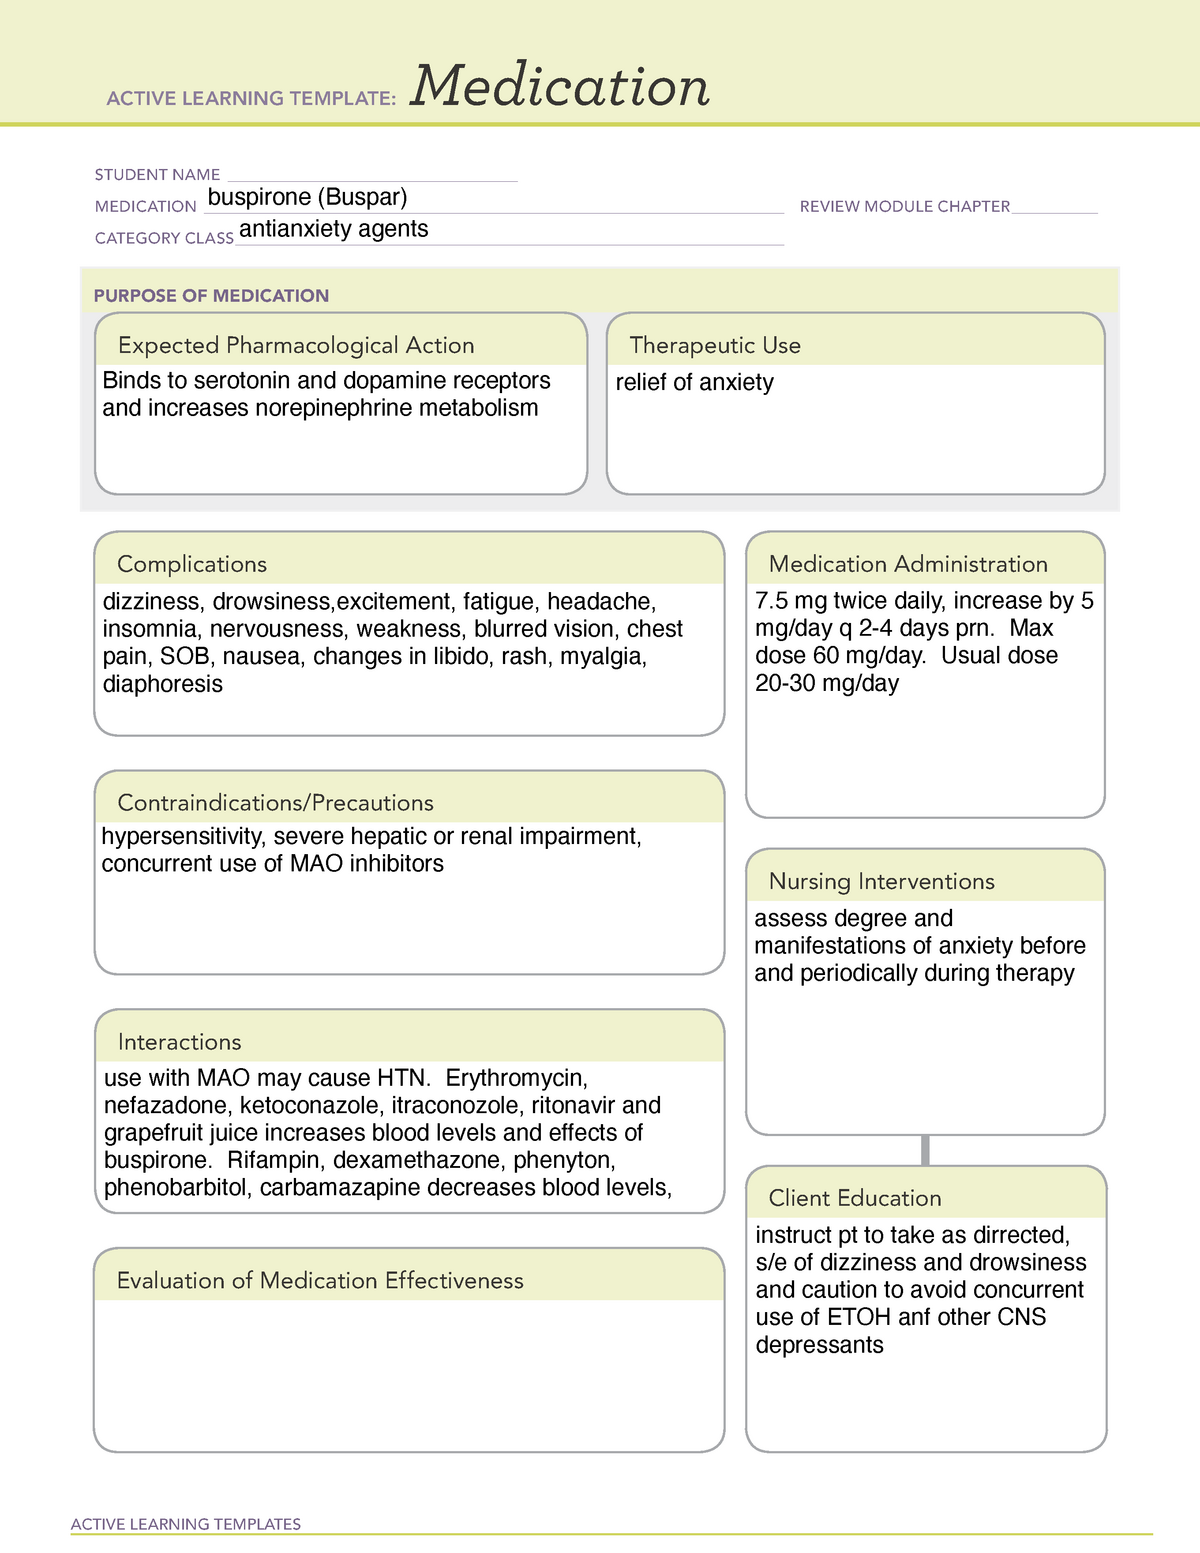 buspirone-ati-medication-template-active-learning-templates